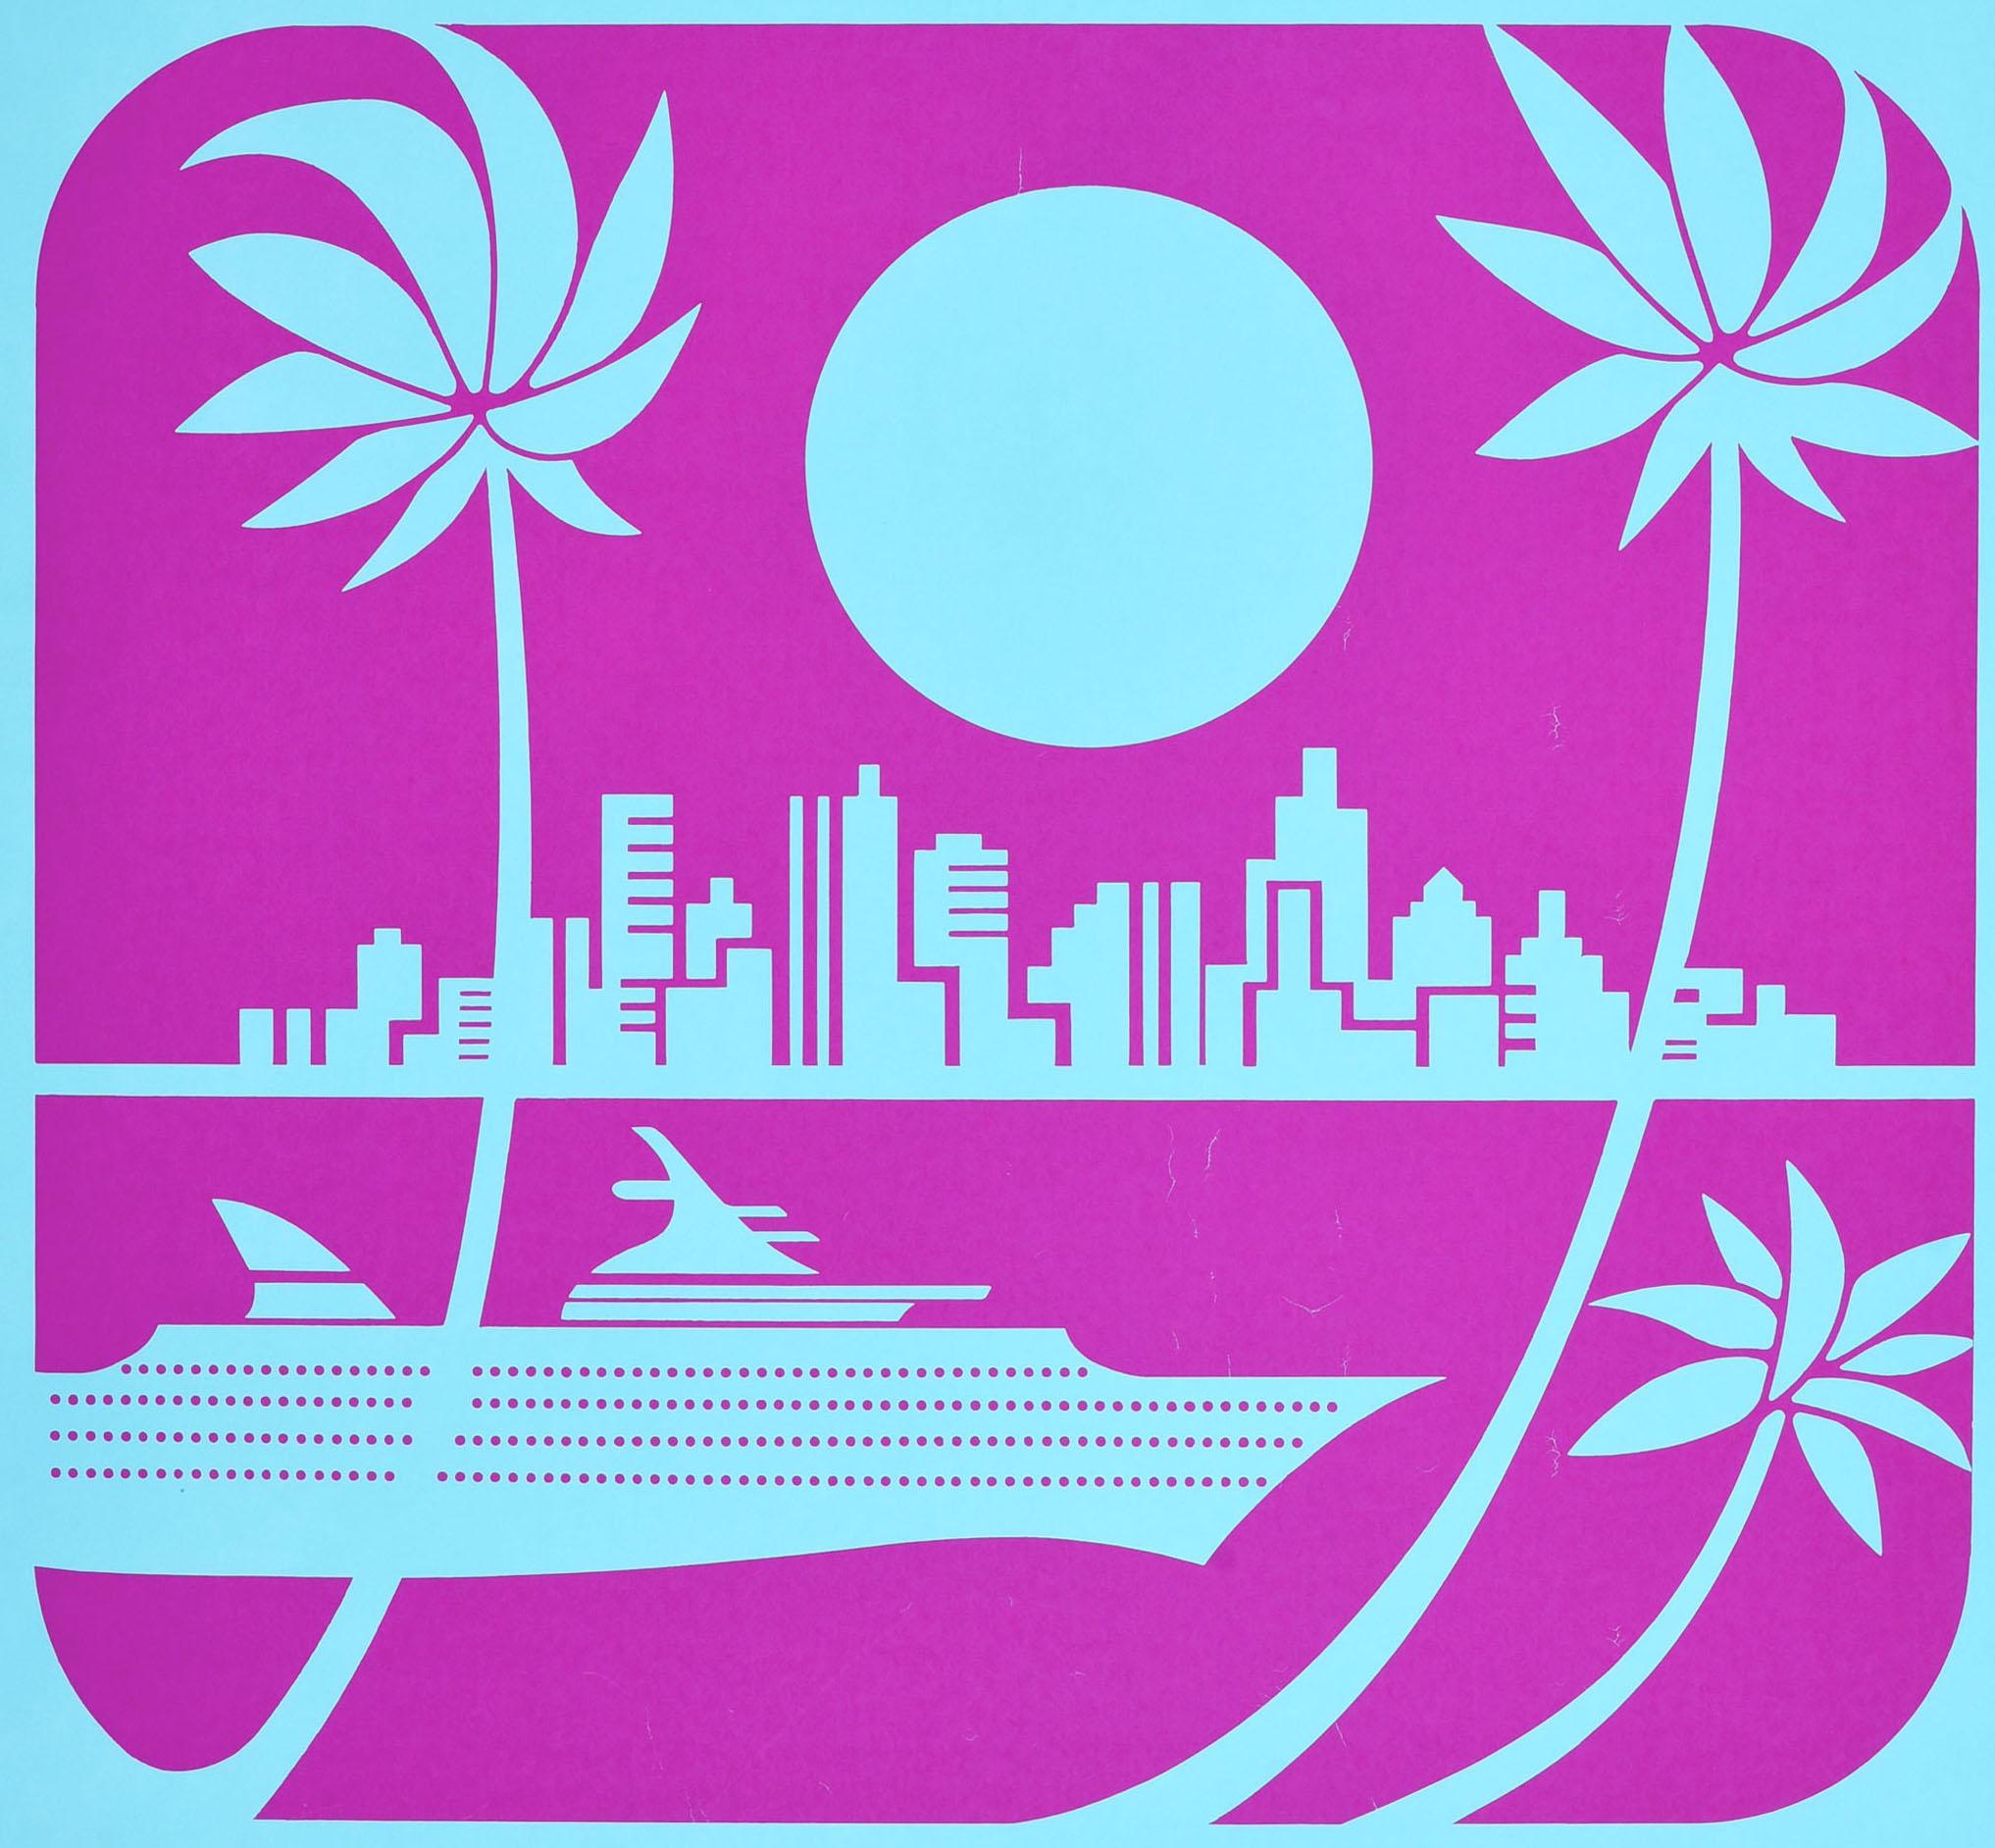 Original vintage travel poster for Florida Bahamas Caribbean issued by Western Airlines featuring a great image of a ship sailing past a city with a sun above and palm trees in the foreground. The California based airline Western Airlines was formed